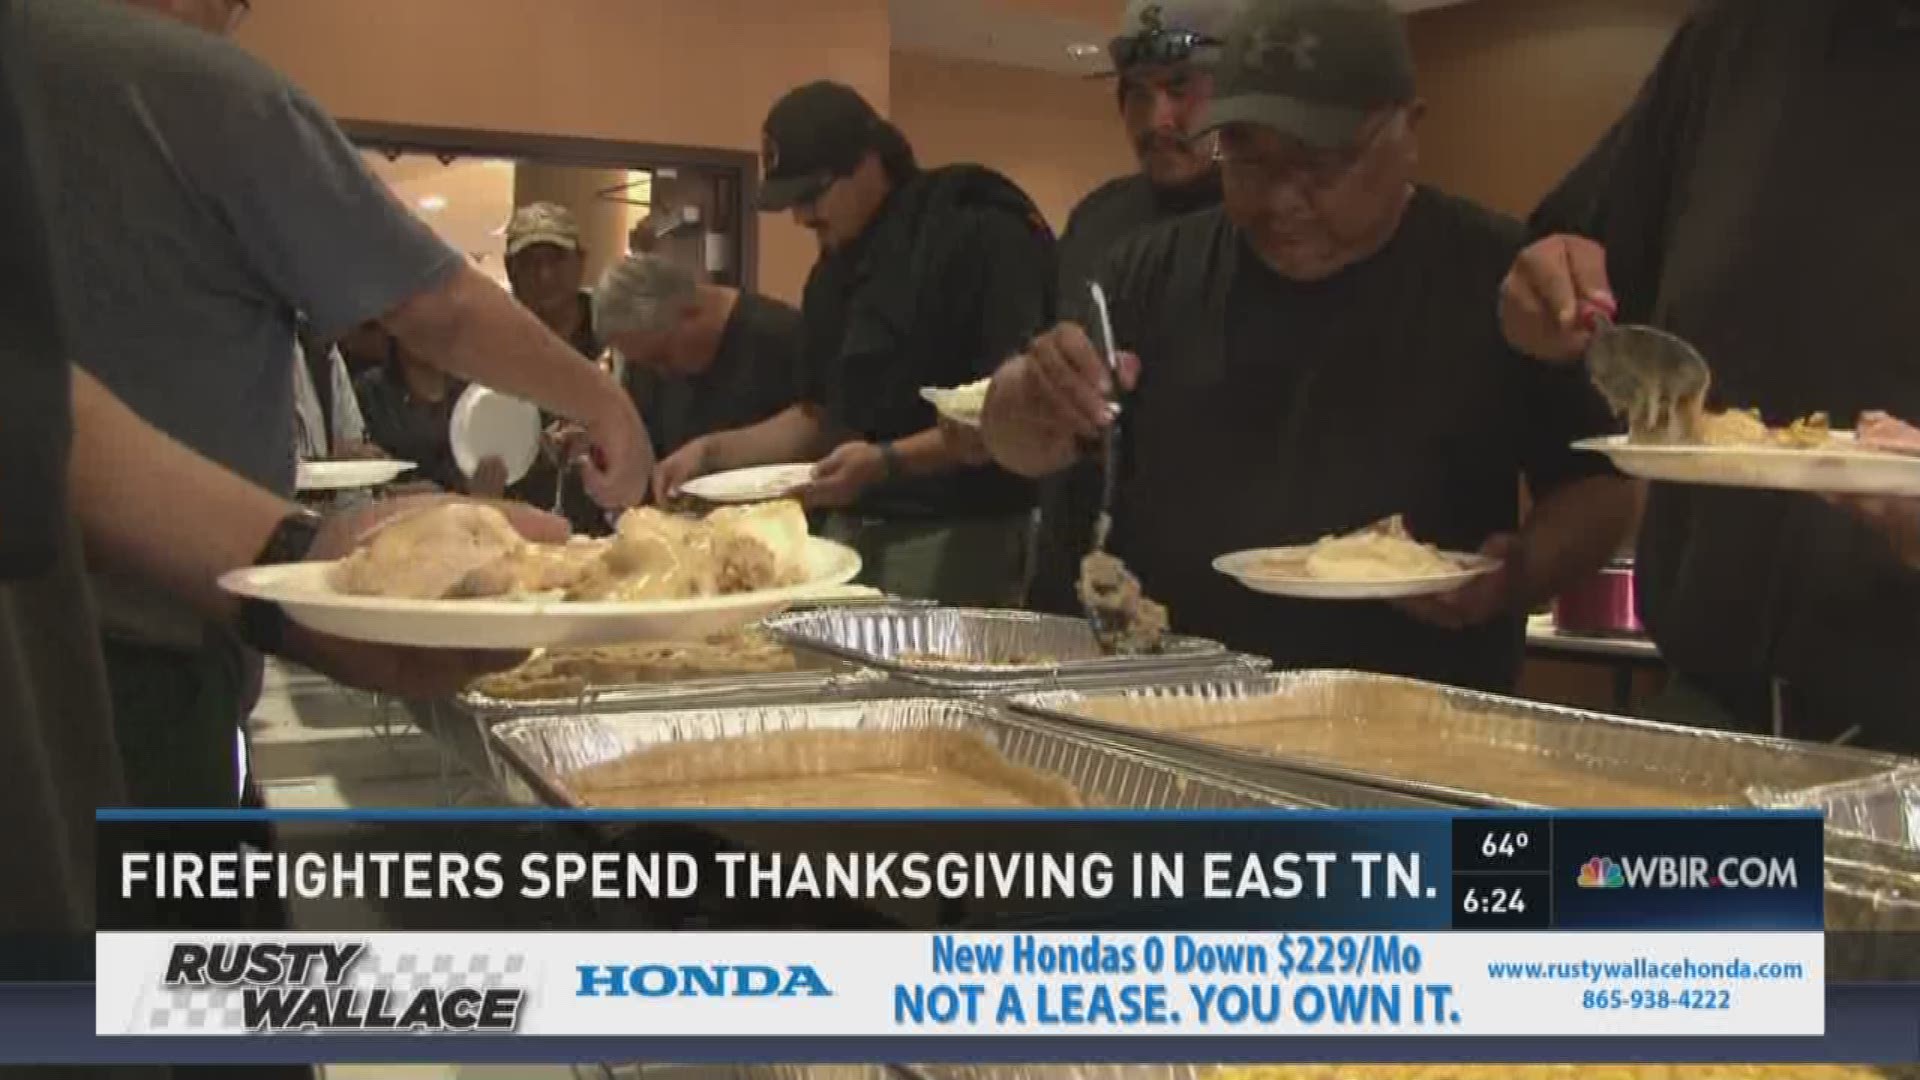 Nov. 24, 2016: Instead of enjoying Thanksgiving at home, a crew of out of state firefighters arrived in East Tennesee to help fight wildfires here. They were welcomed with a meal put together by the kindness of strangers.